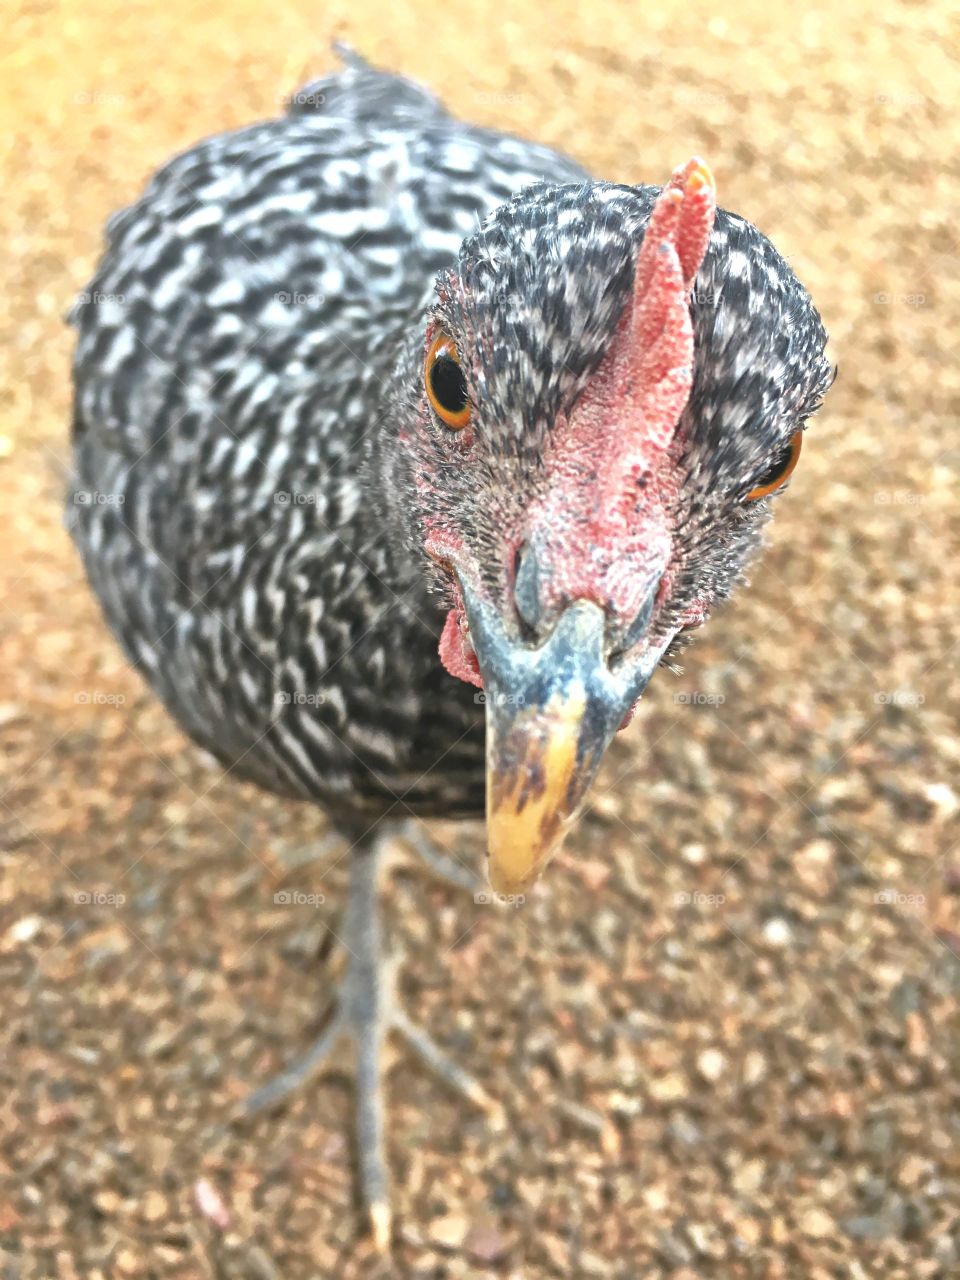 Young barred rock free range pet chicken 